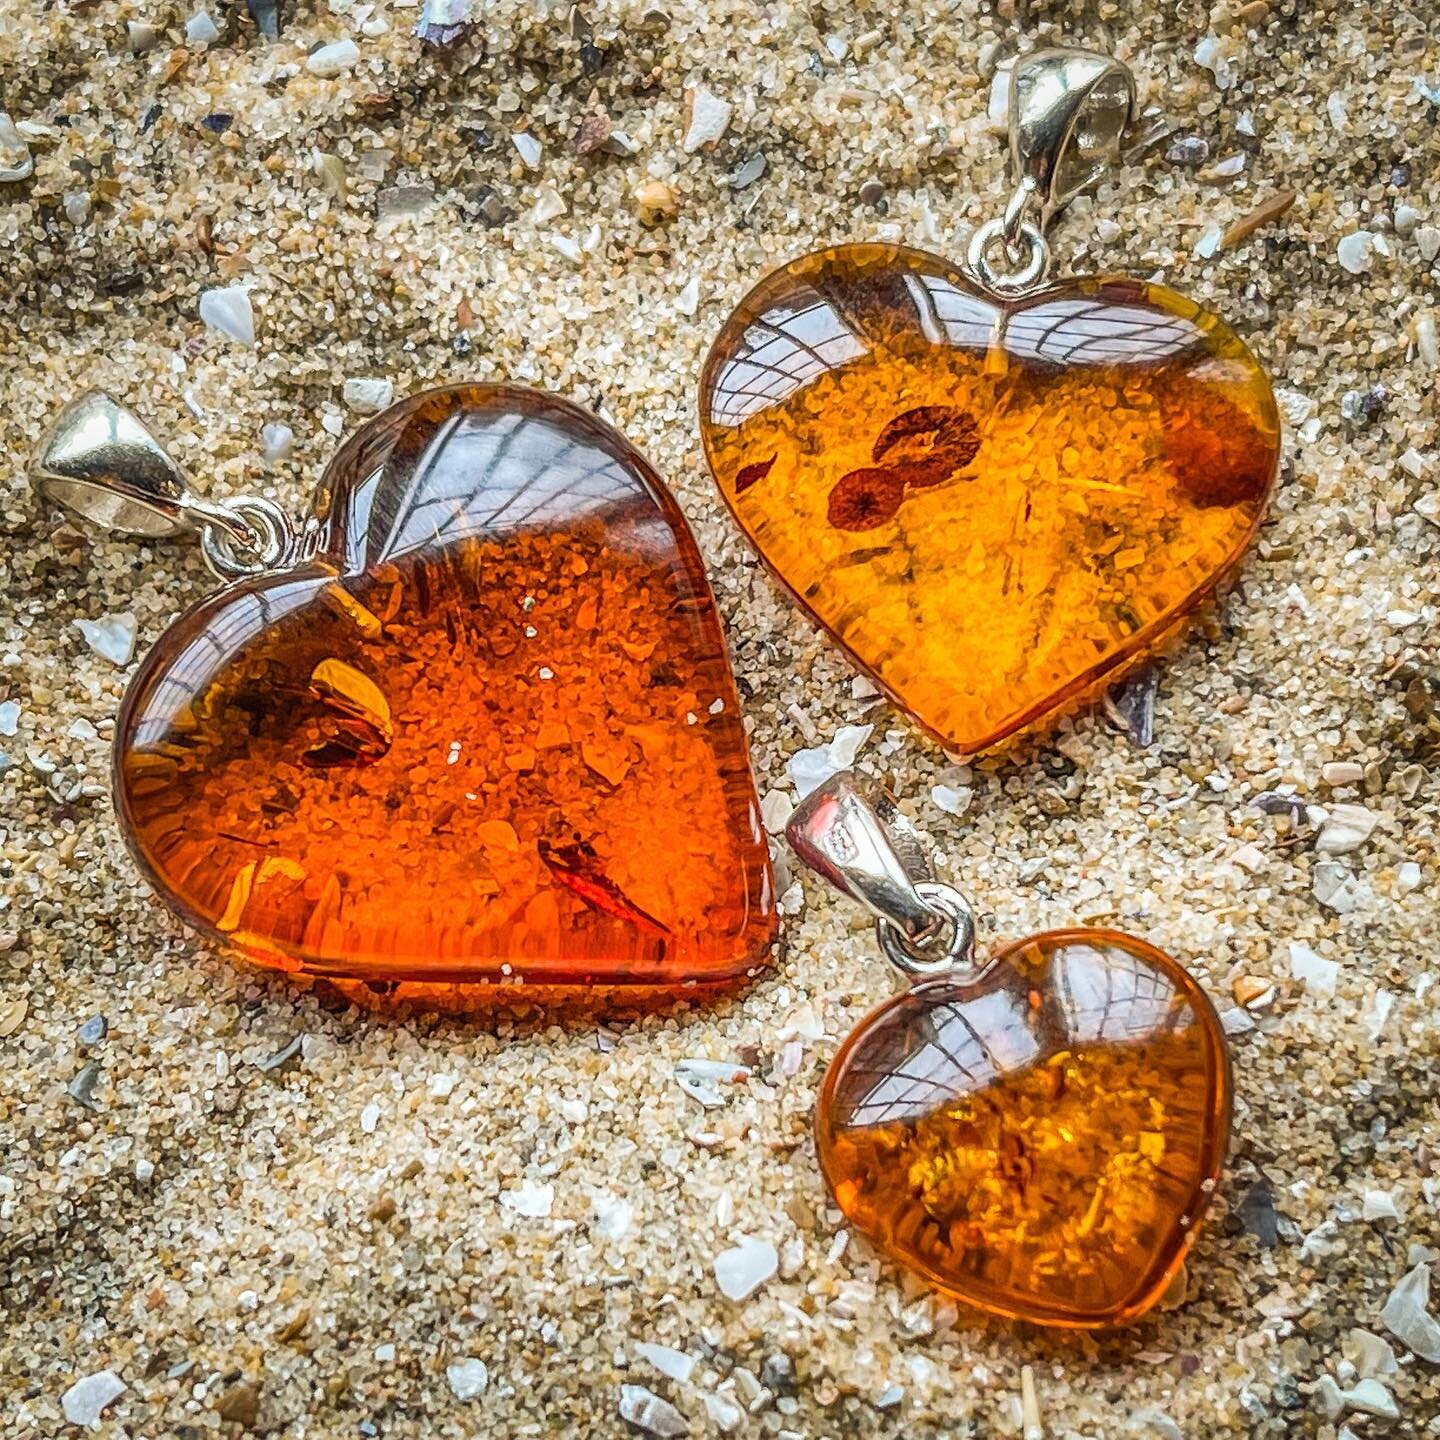 Lots of amazing new stock arriving daily, like these stunning amber hearts. Check Instore for the full range 

#amberjewelry #amber #balticamber #sterlingsilver #uniquejewelry #independent #independantbusiness #icenine #nottingham